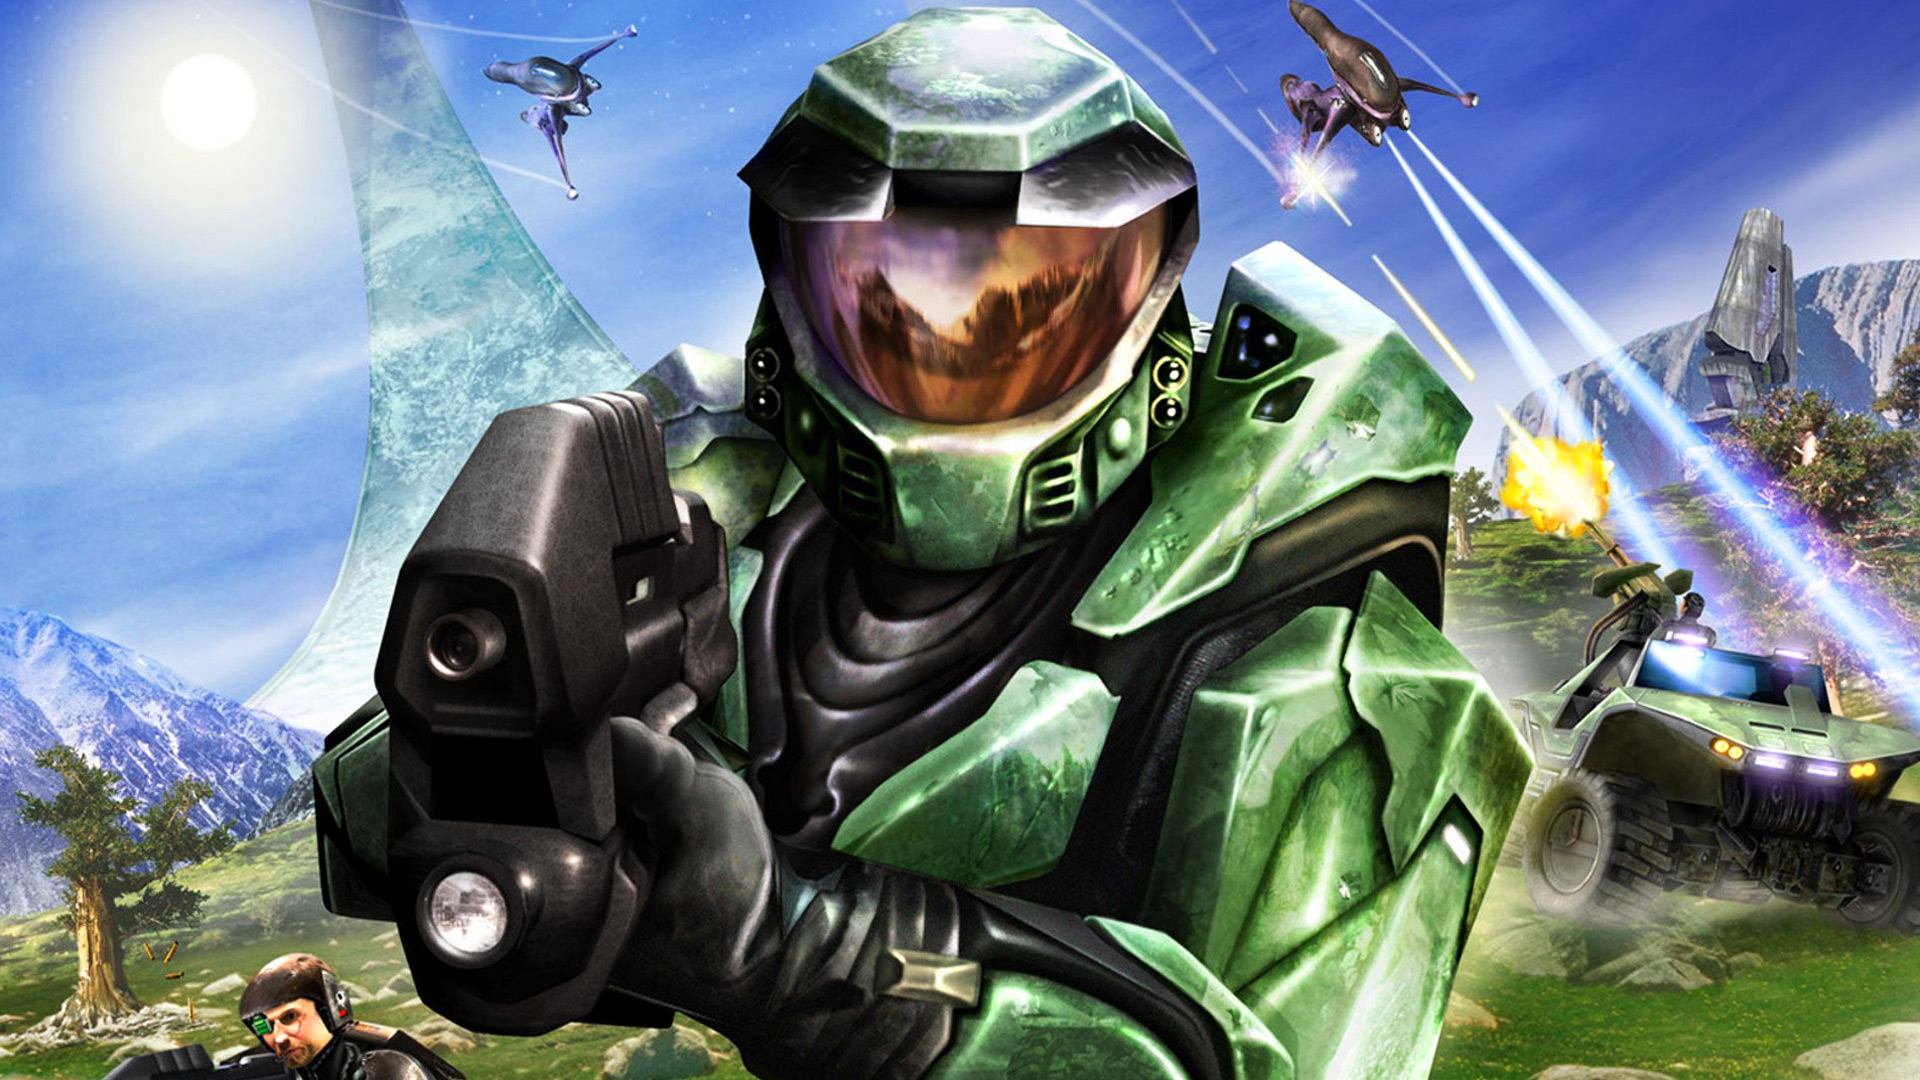 Halo games in order: Halo Combat Evolved art showing Master Chief in his earliest iteration.